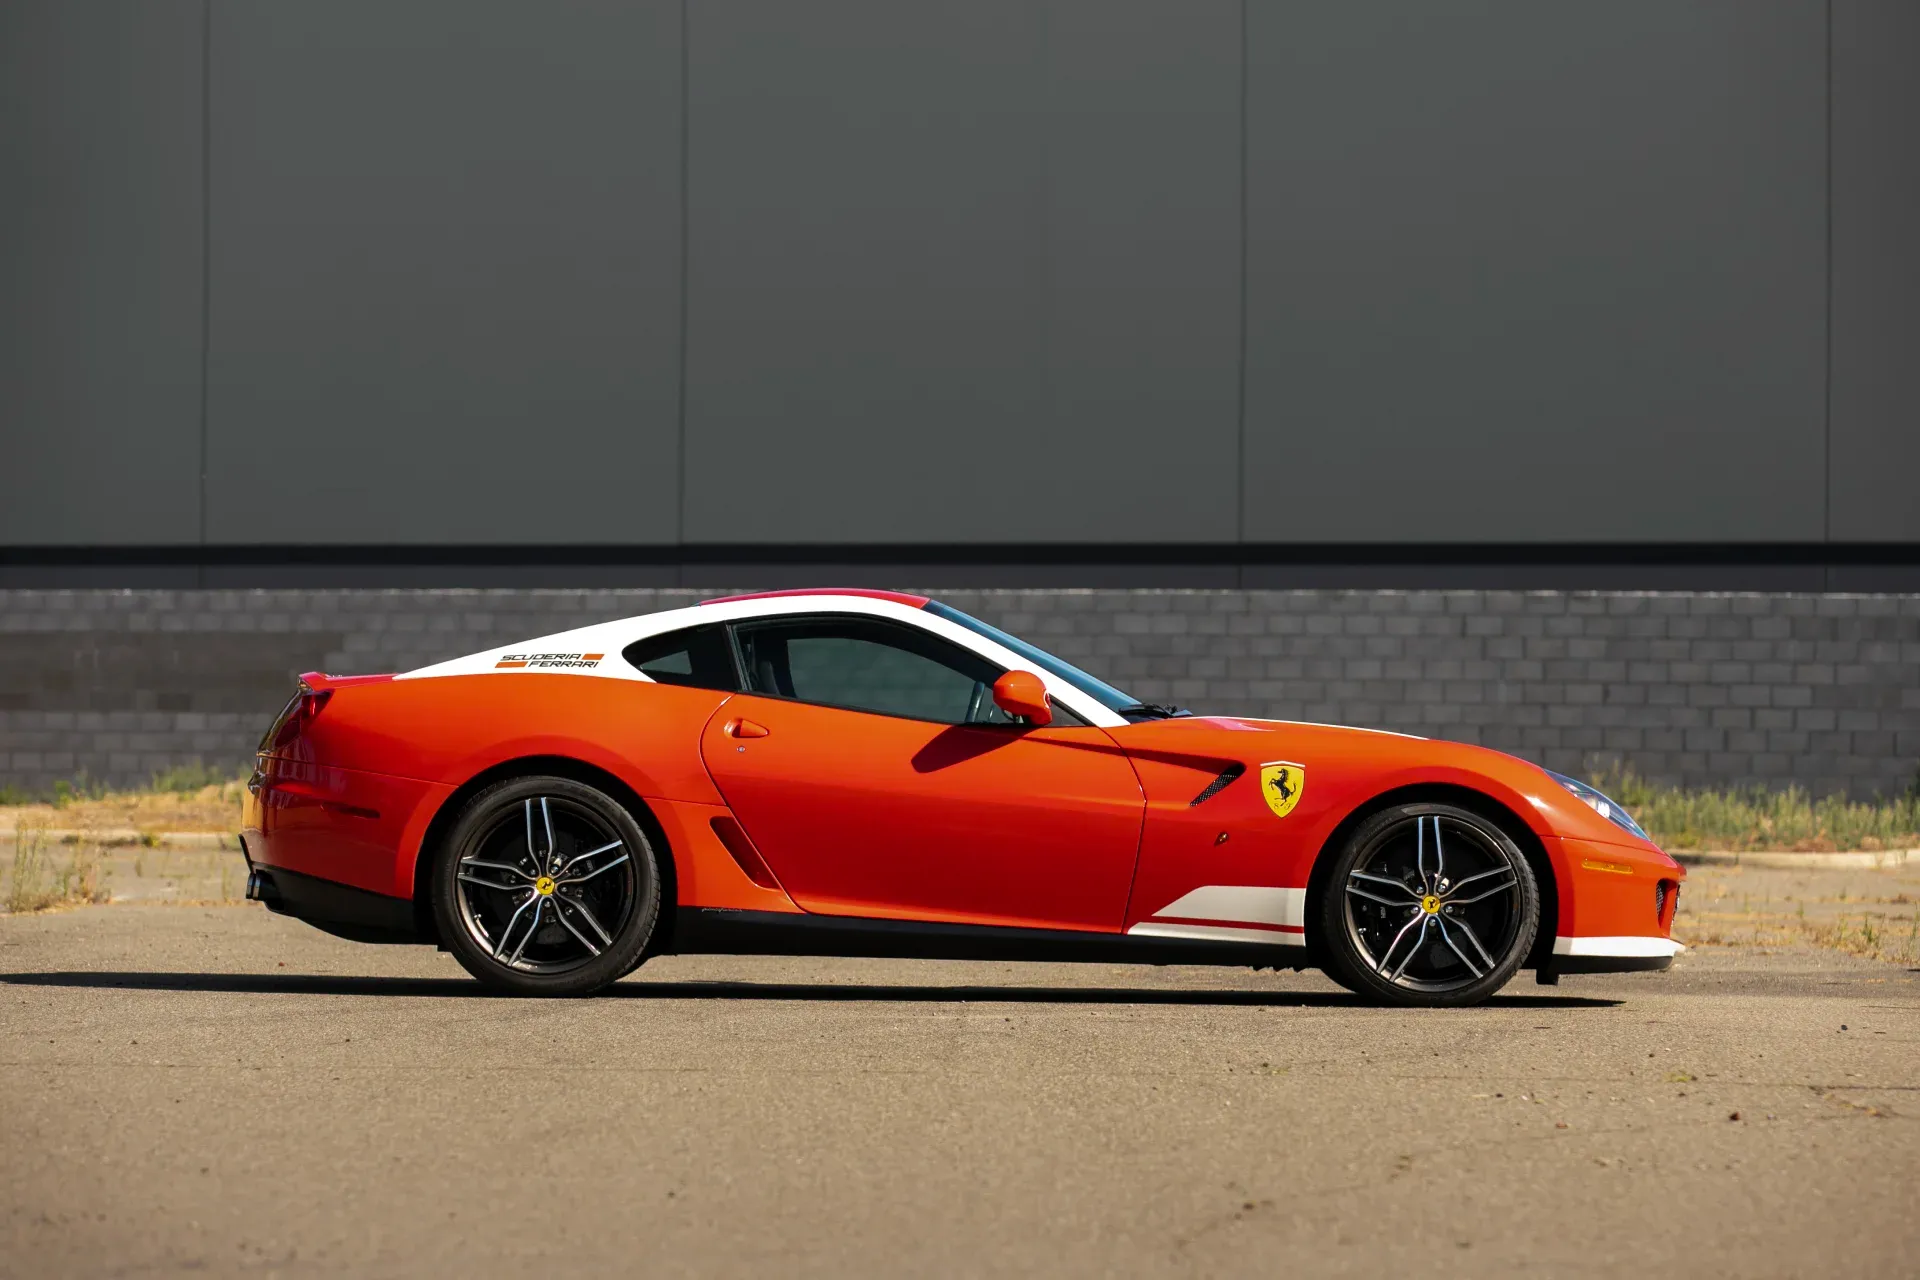 american, news, newsletter, highlights, muscle, handpicked, sports, client, classic, modern classic, europe, features, luxury, trucks, celebrity, off-road, german, rare 2011 ferrari 599 gtb fiorano alonso final edition